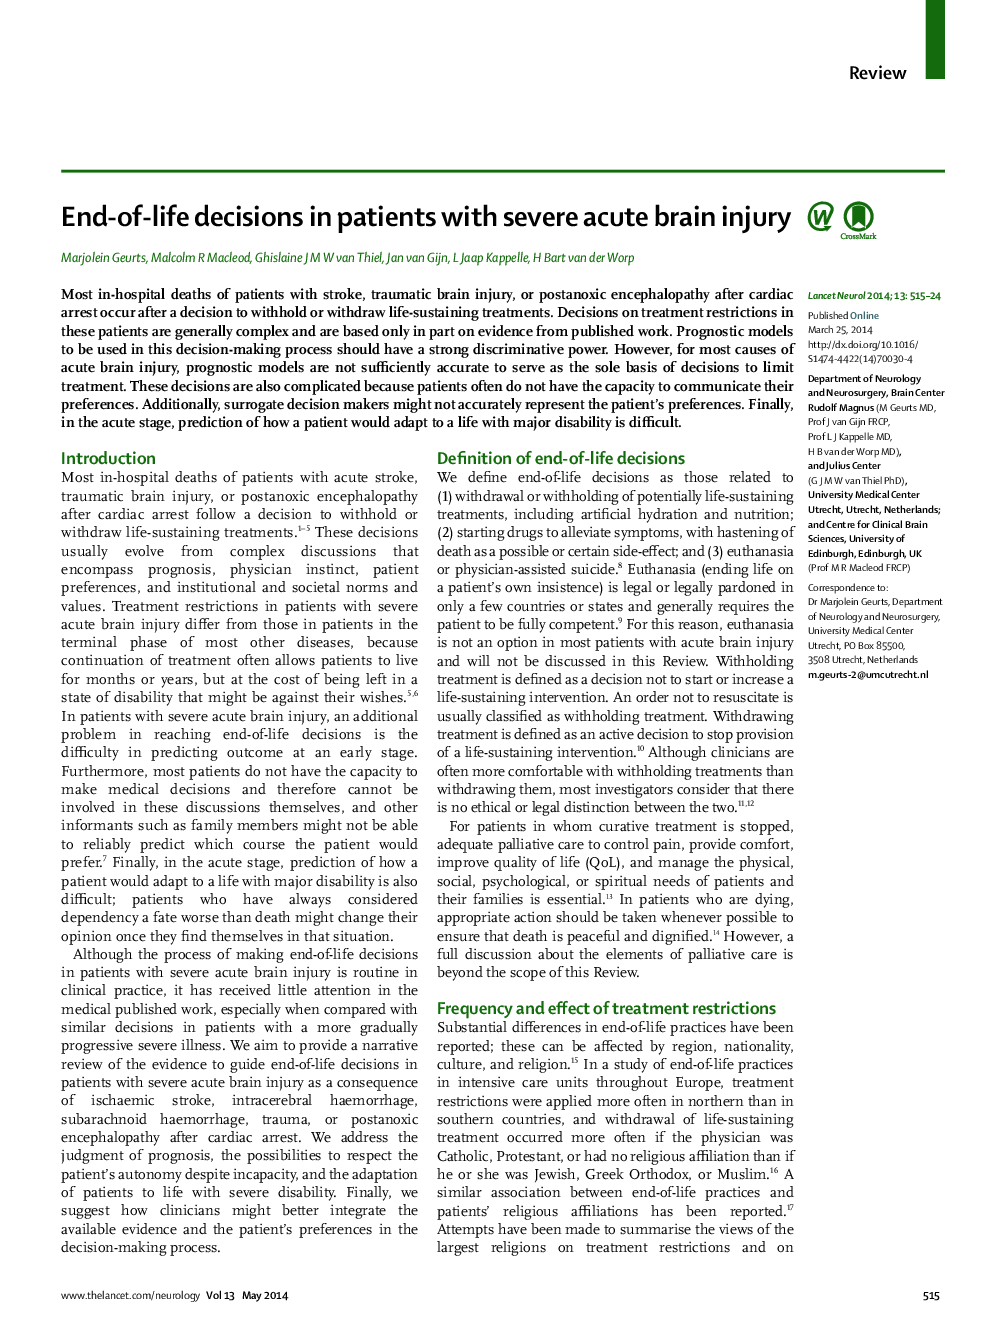 End-of-life decisions in patients with severe acute brain injury